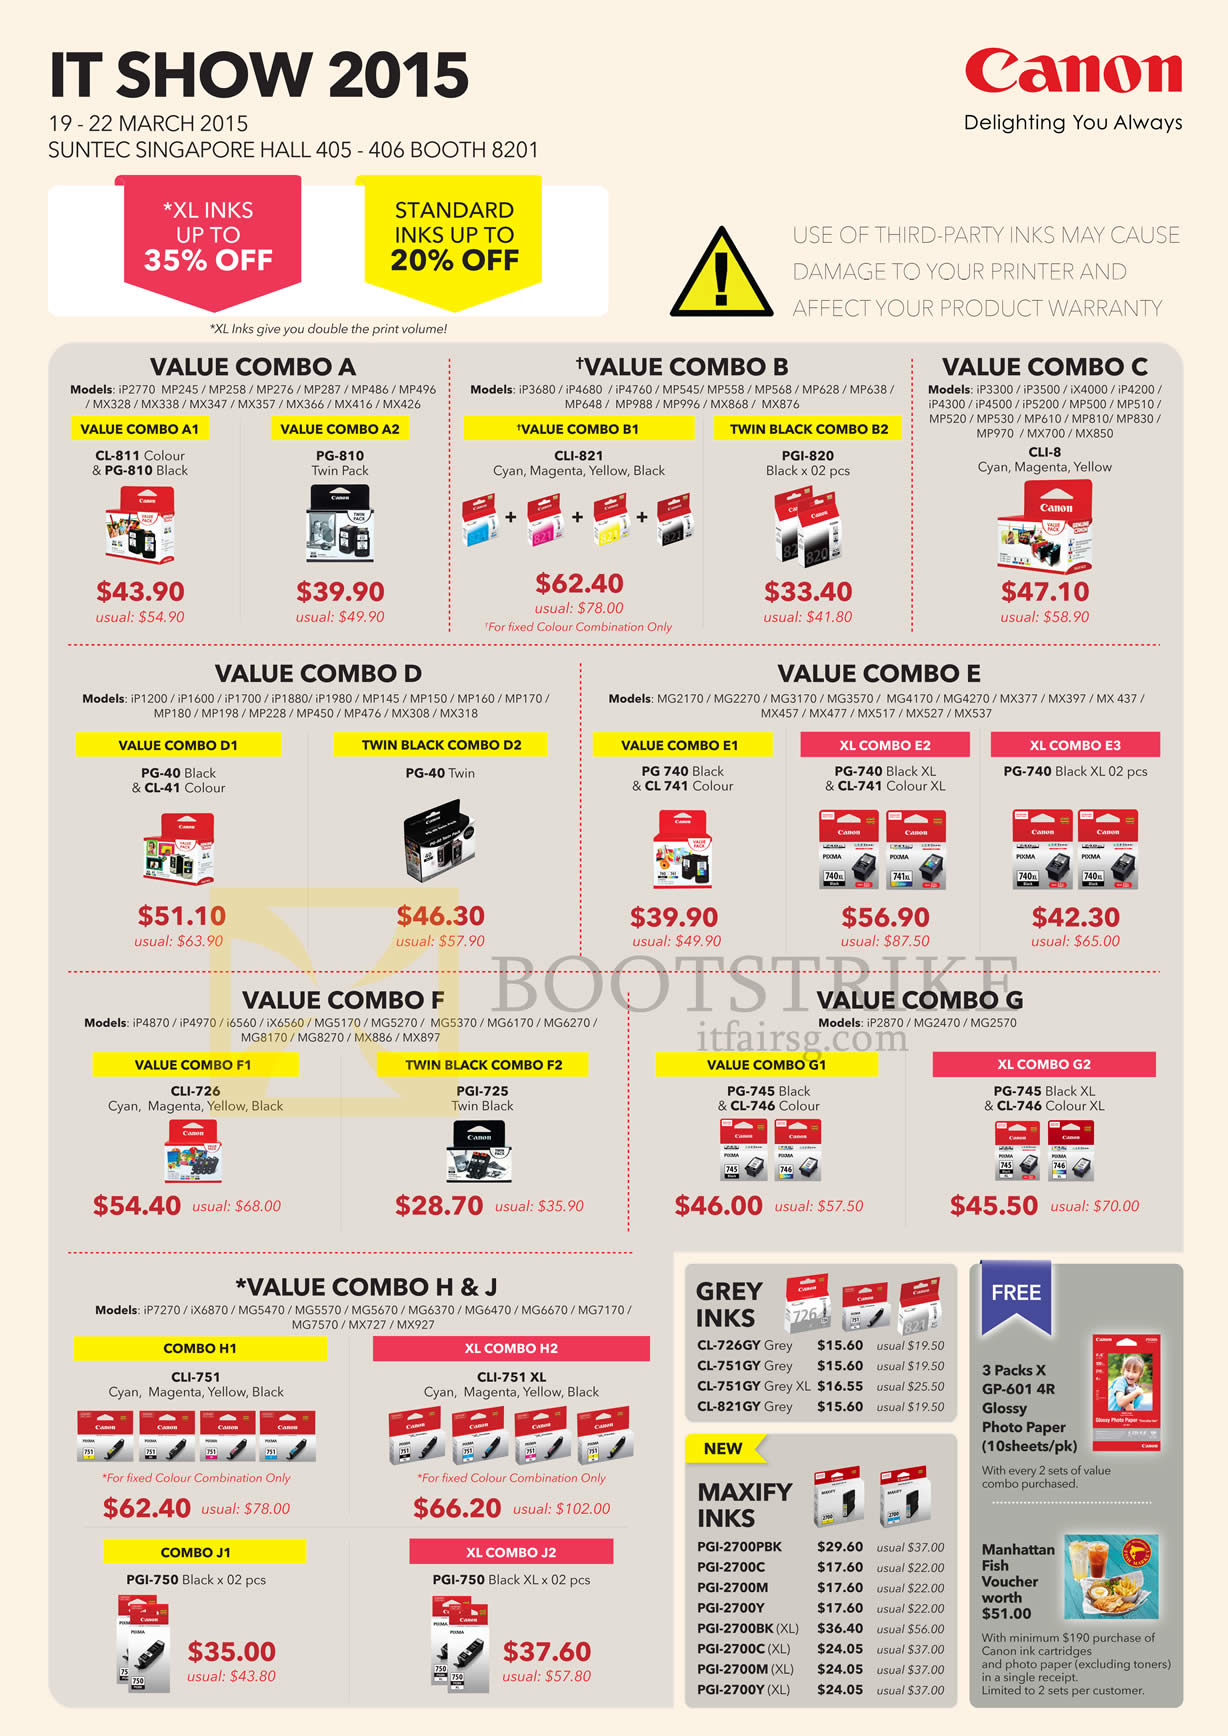 IT SHOW 2015 price list image brochure of Canon Ink Cartridges, Toner, Value Combo A, B, C, D, E, F, G, H, J, Grey Inks, Maxify Inks